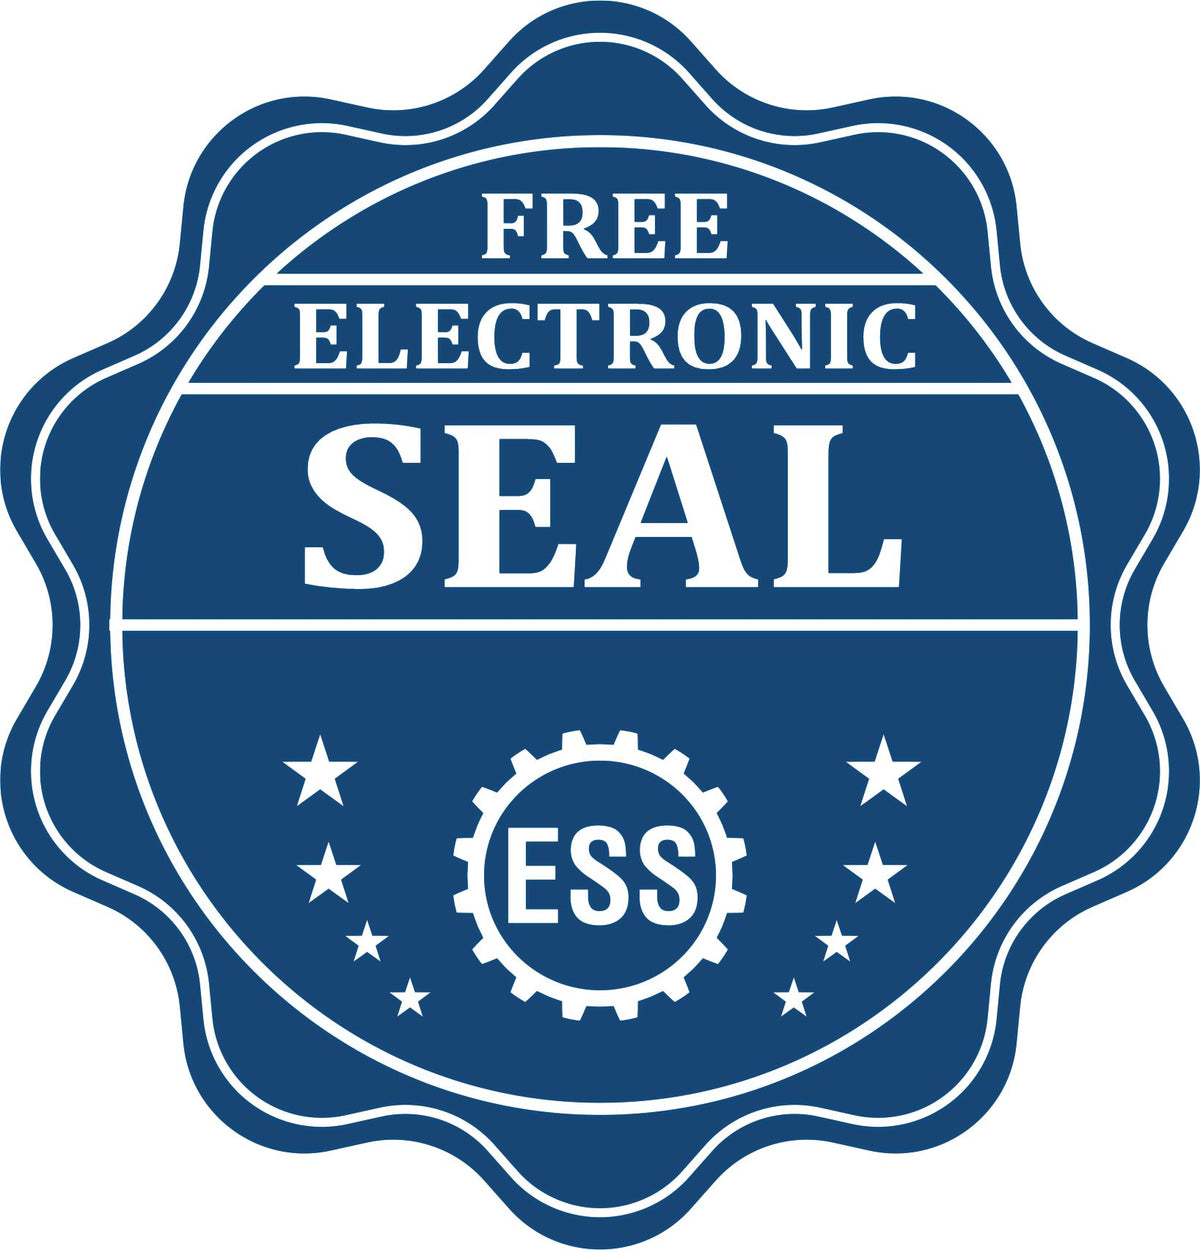 A badge showing a free electronic seal for the Slim Pre-Inked Maine Professional Engineer Seal Stamp with stars and the ESS gear on the emblem.